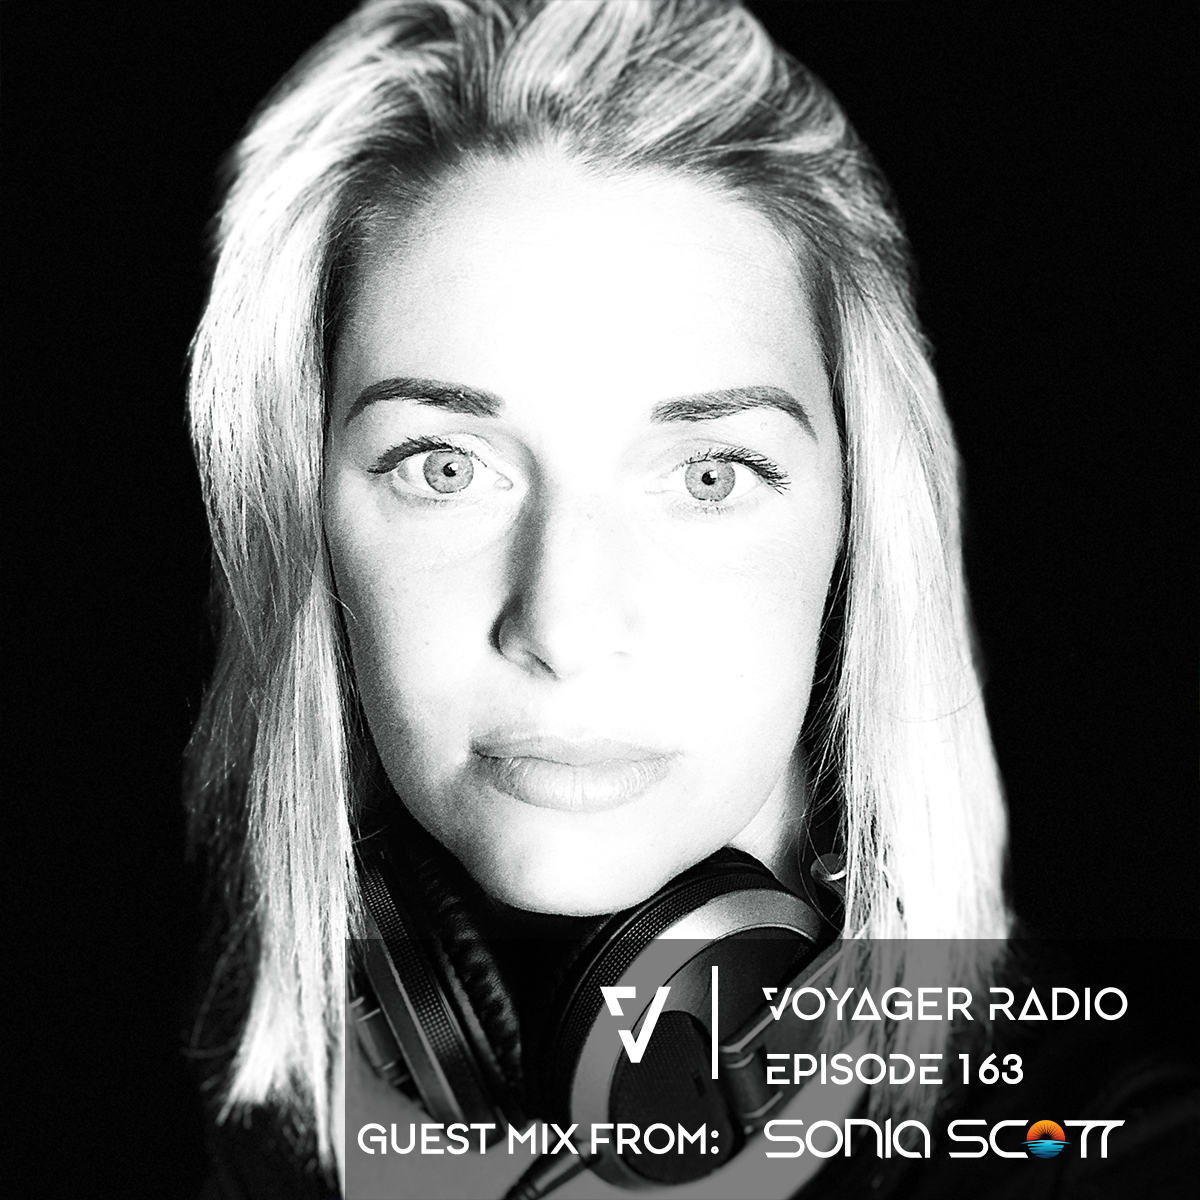 V proud of @SoniaScottMusic making her debut on @suzchesterton's #VoyagerRadio tonight on @GrooveCityRadio from 10pm! She was our competition winner in 2020 and worked with us on #Connected! Tonight she'll be playing her own exclusive, signed to a huge trance label! #trancefam